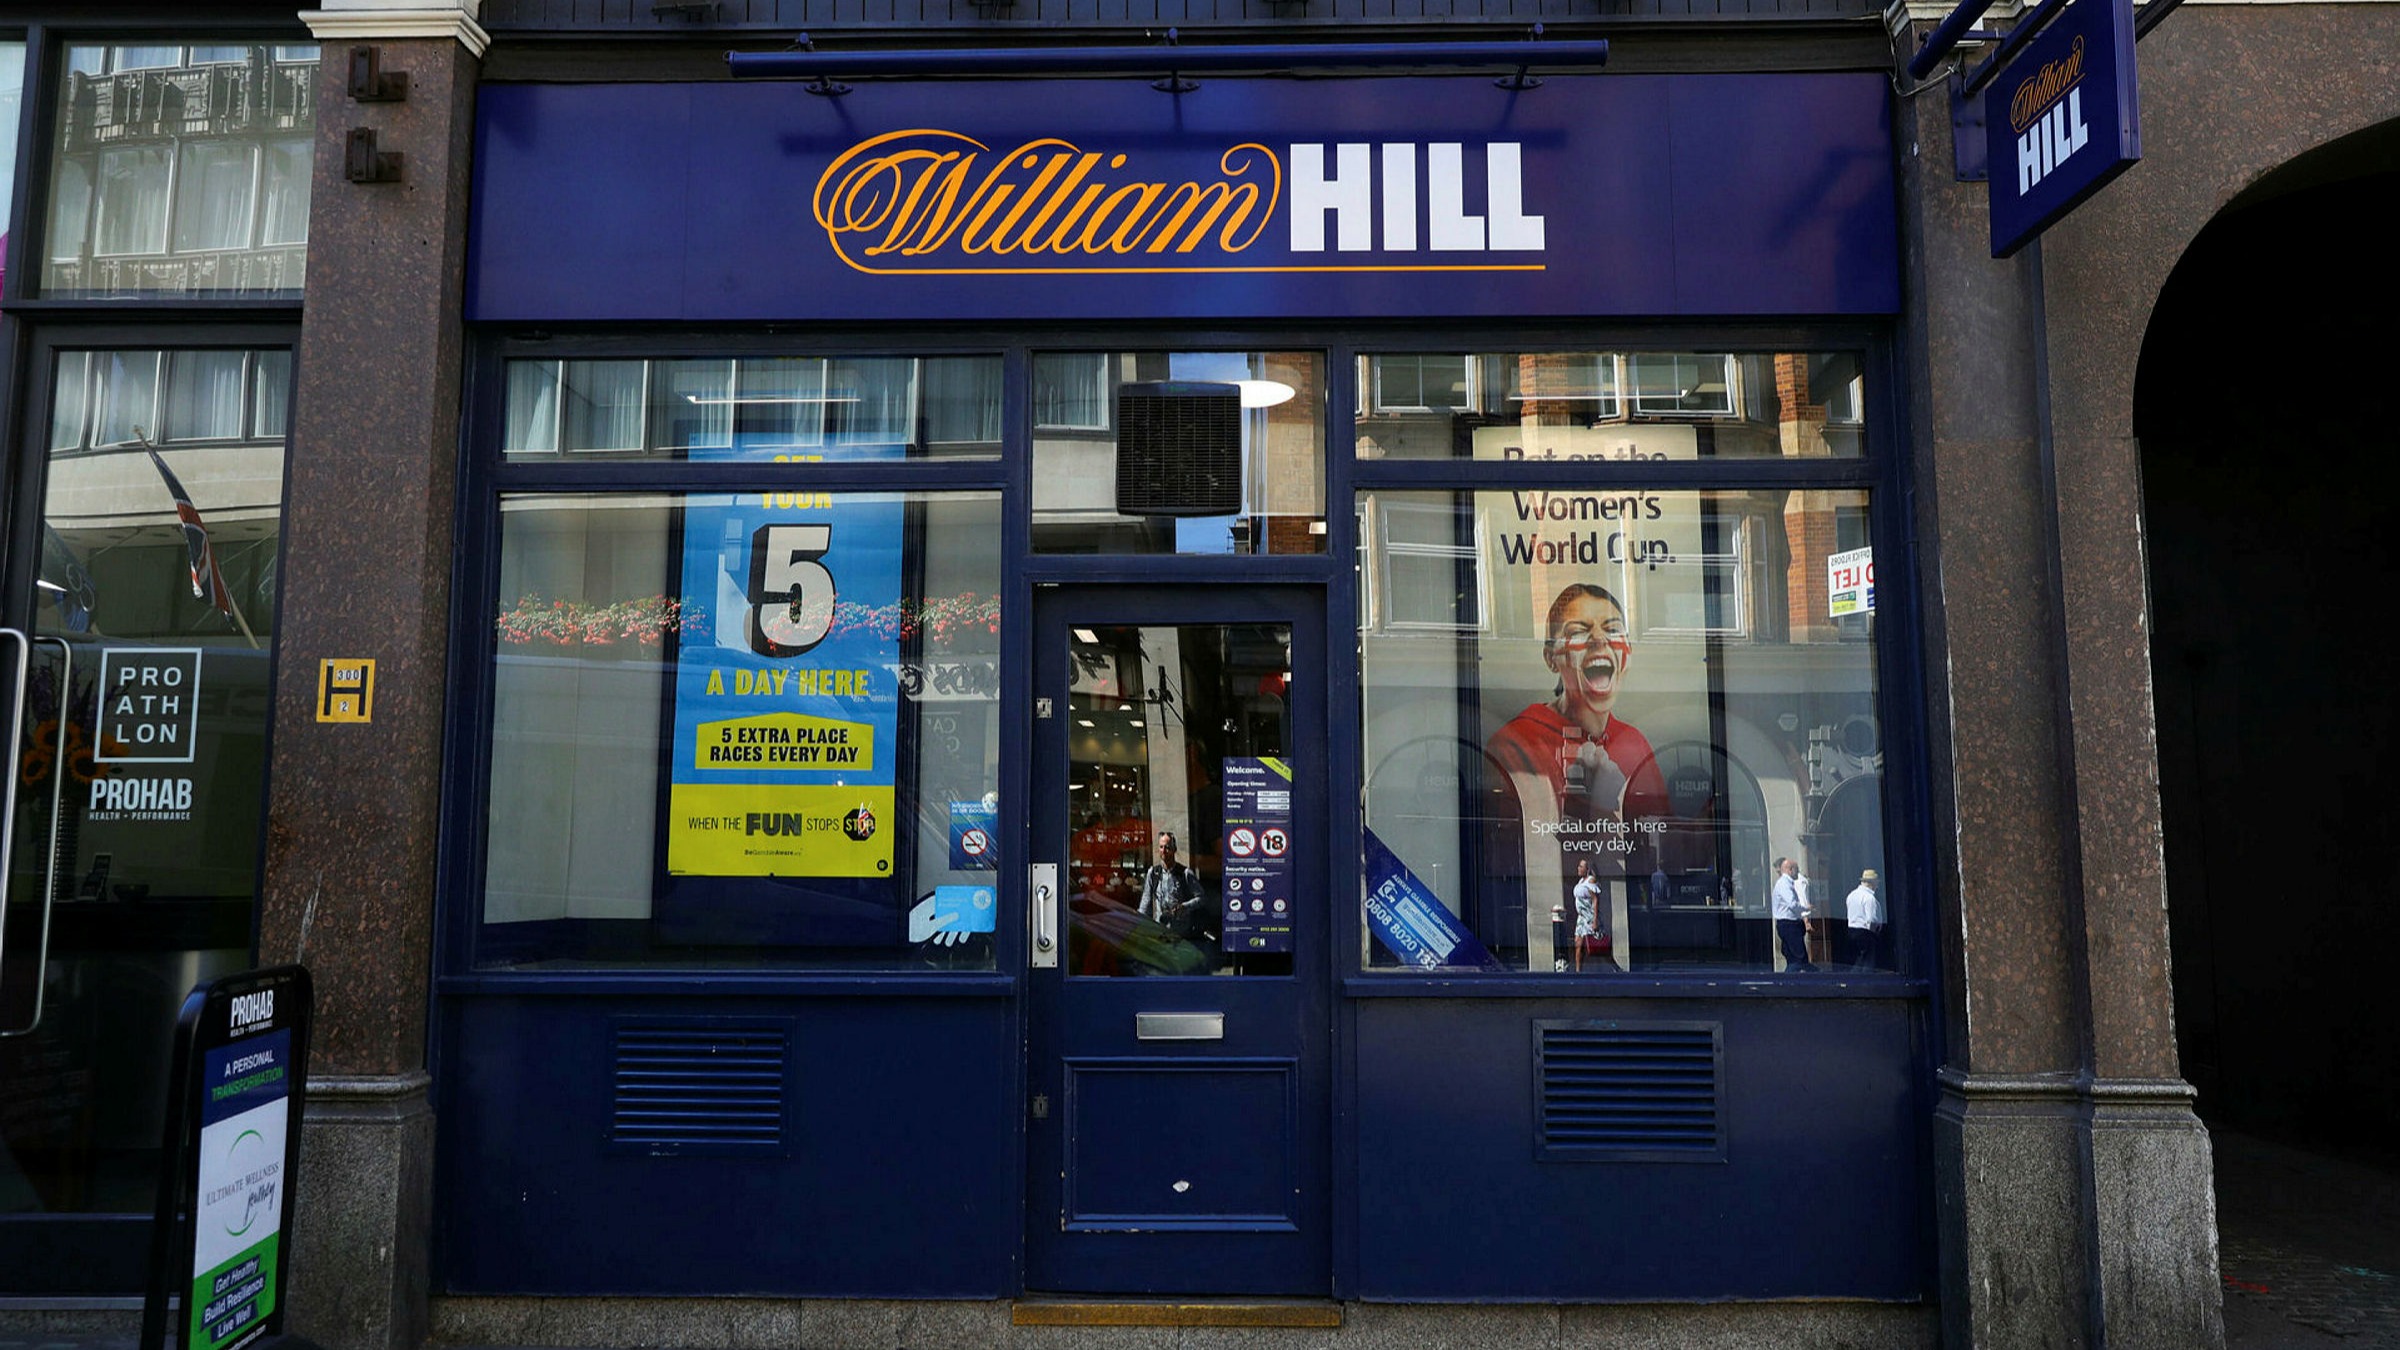 Contest Held between HBK and Caesars to Takeover William Hill